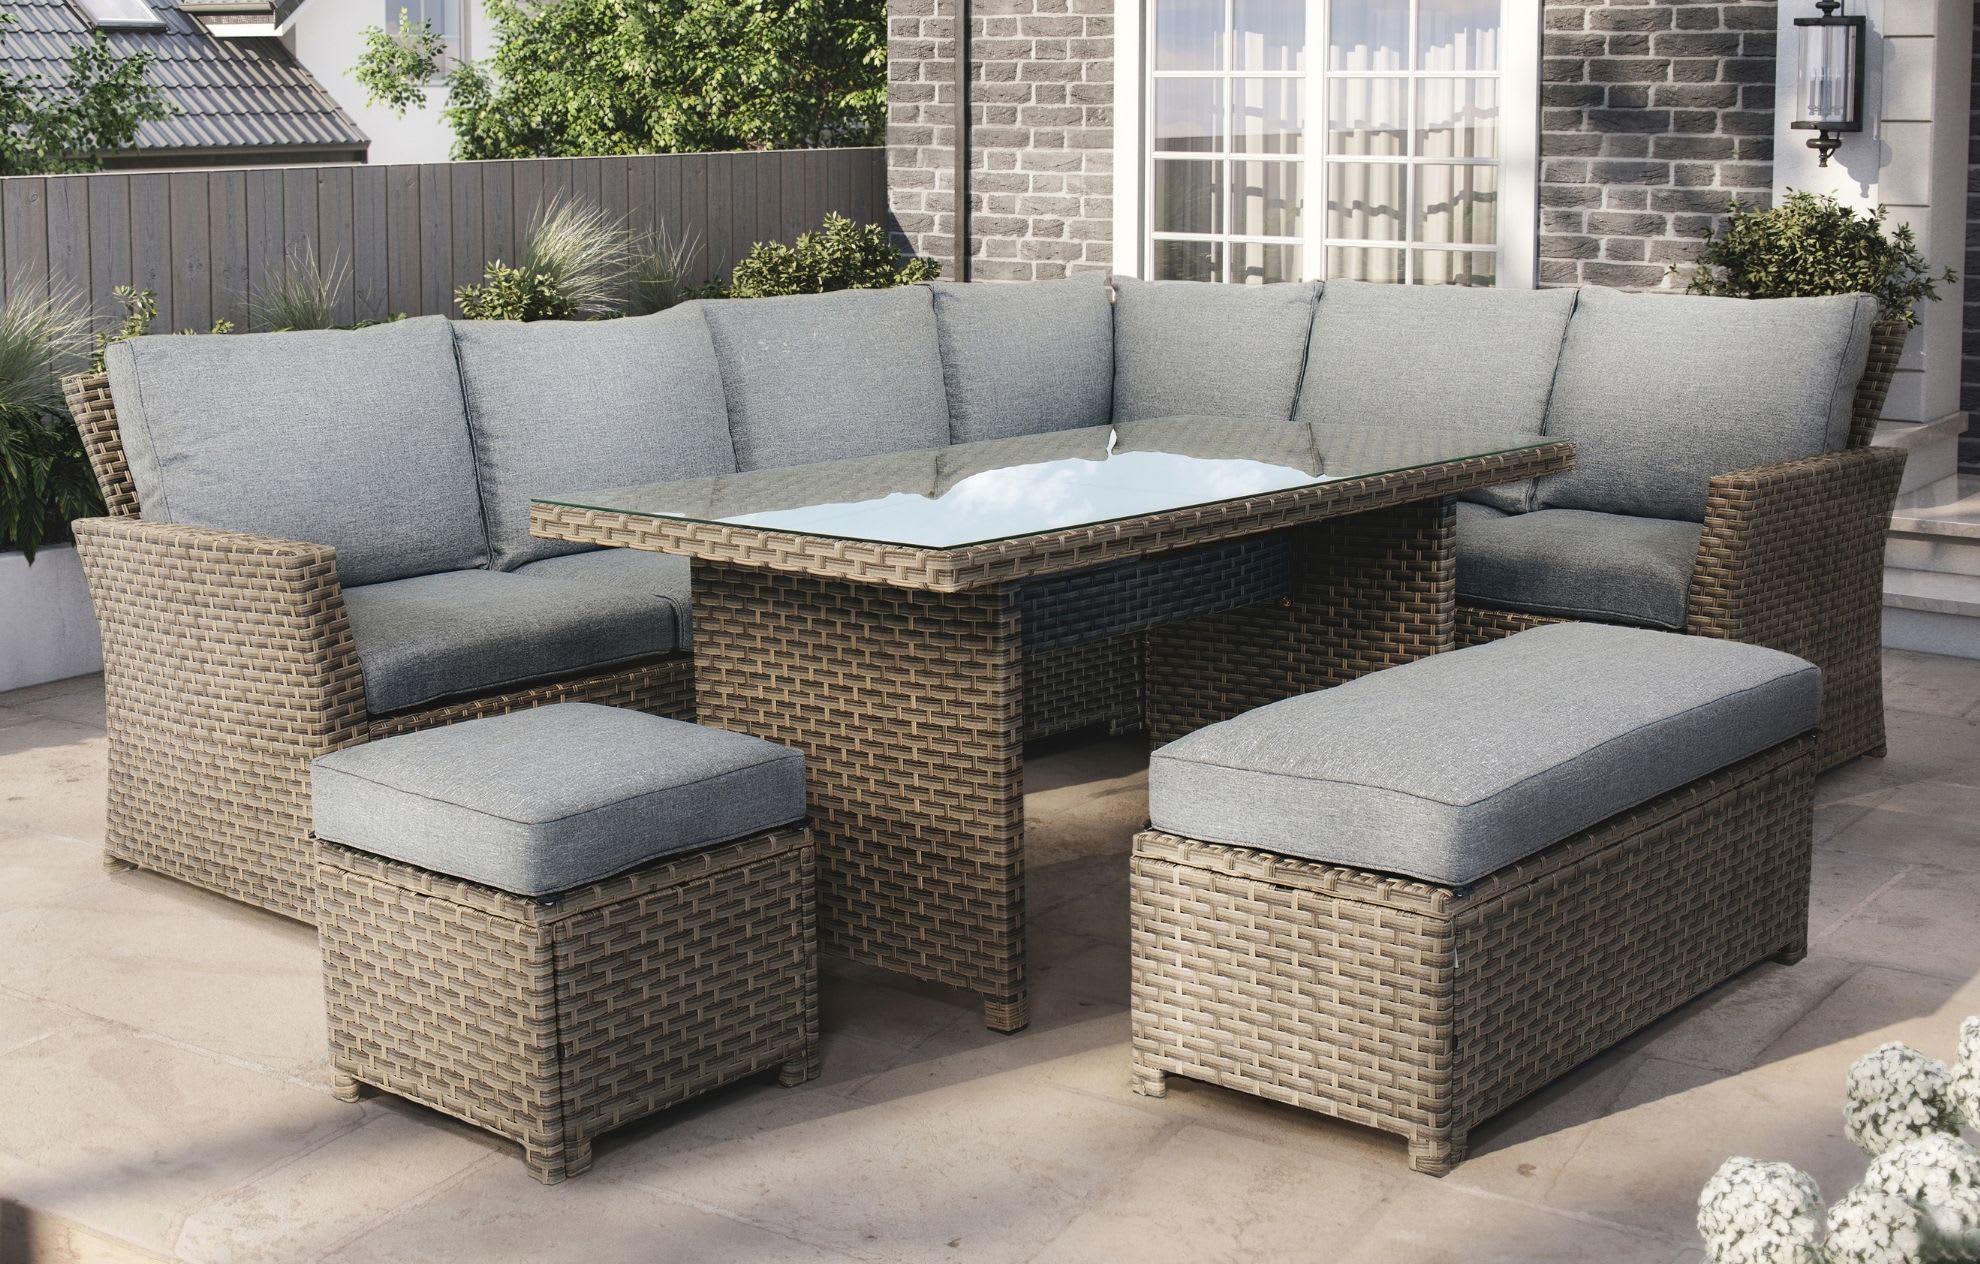 Water resistant 9 seater Palma corner rattan garden lounge set with cushions